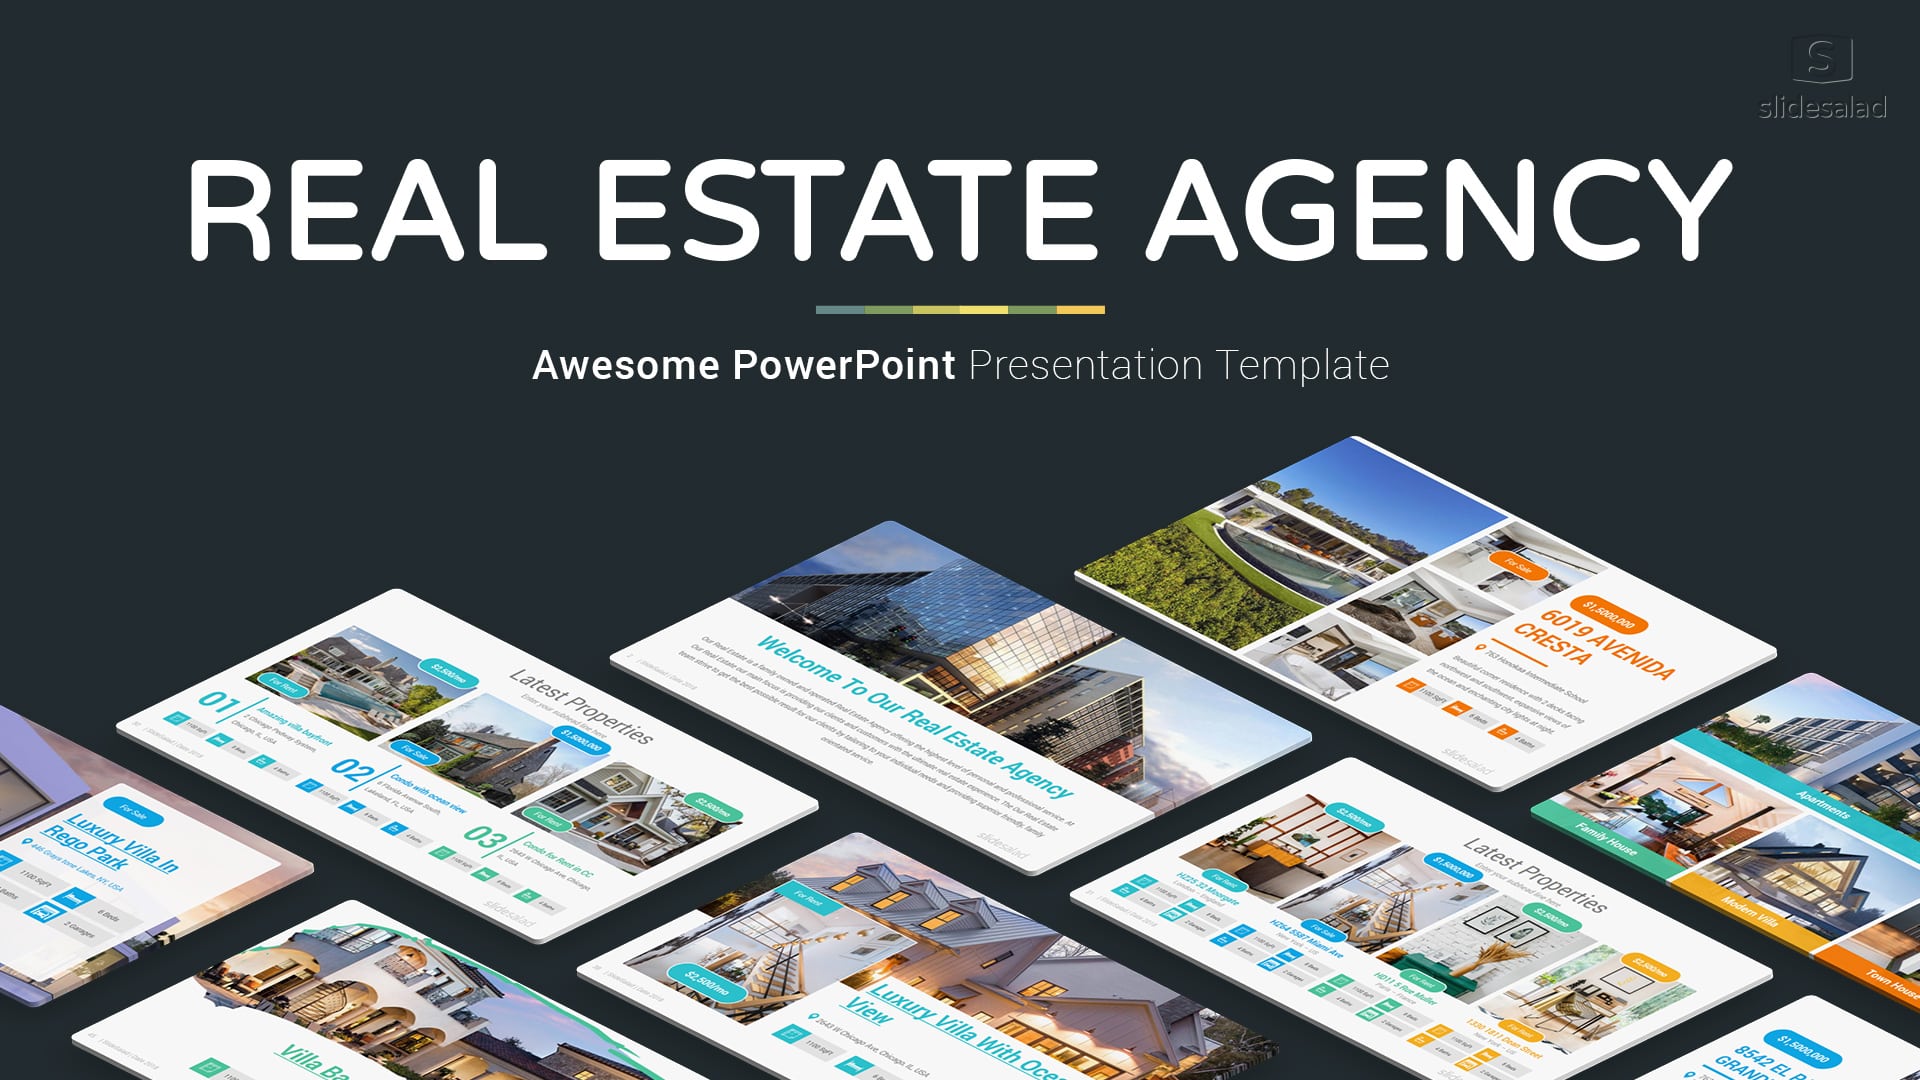 Real Estate Agency PowerPoint Template Designs